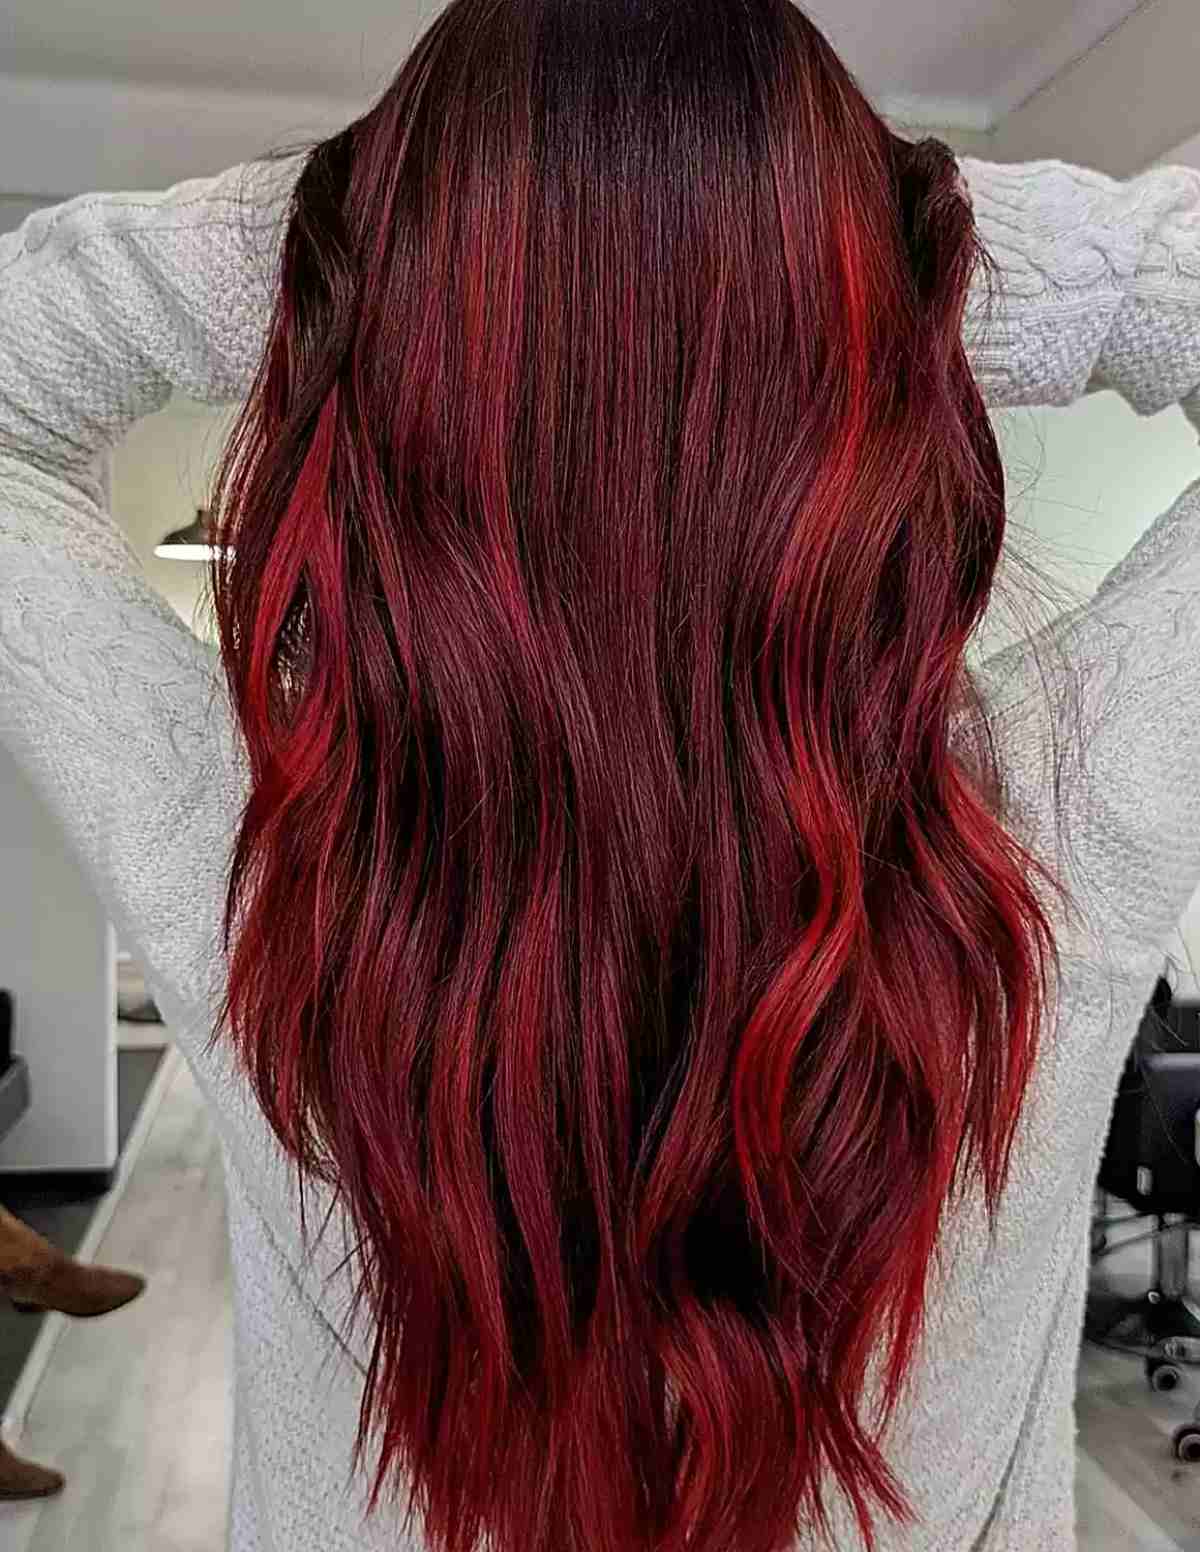 Neon Red Balayage Highlights with Dark Brown Roots for Very Long Hair